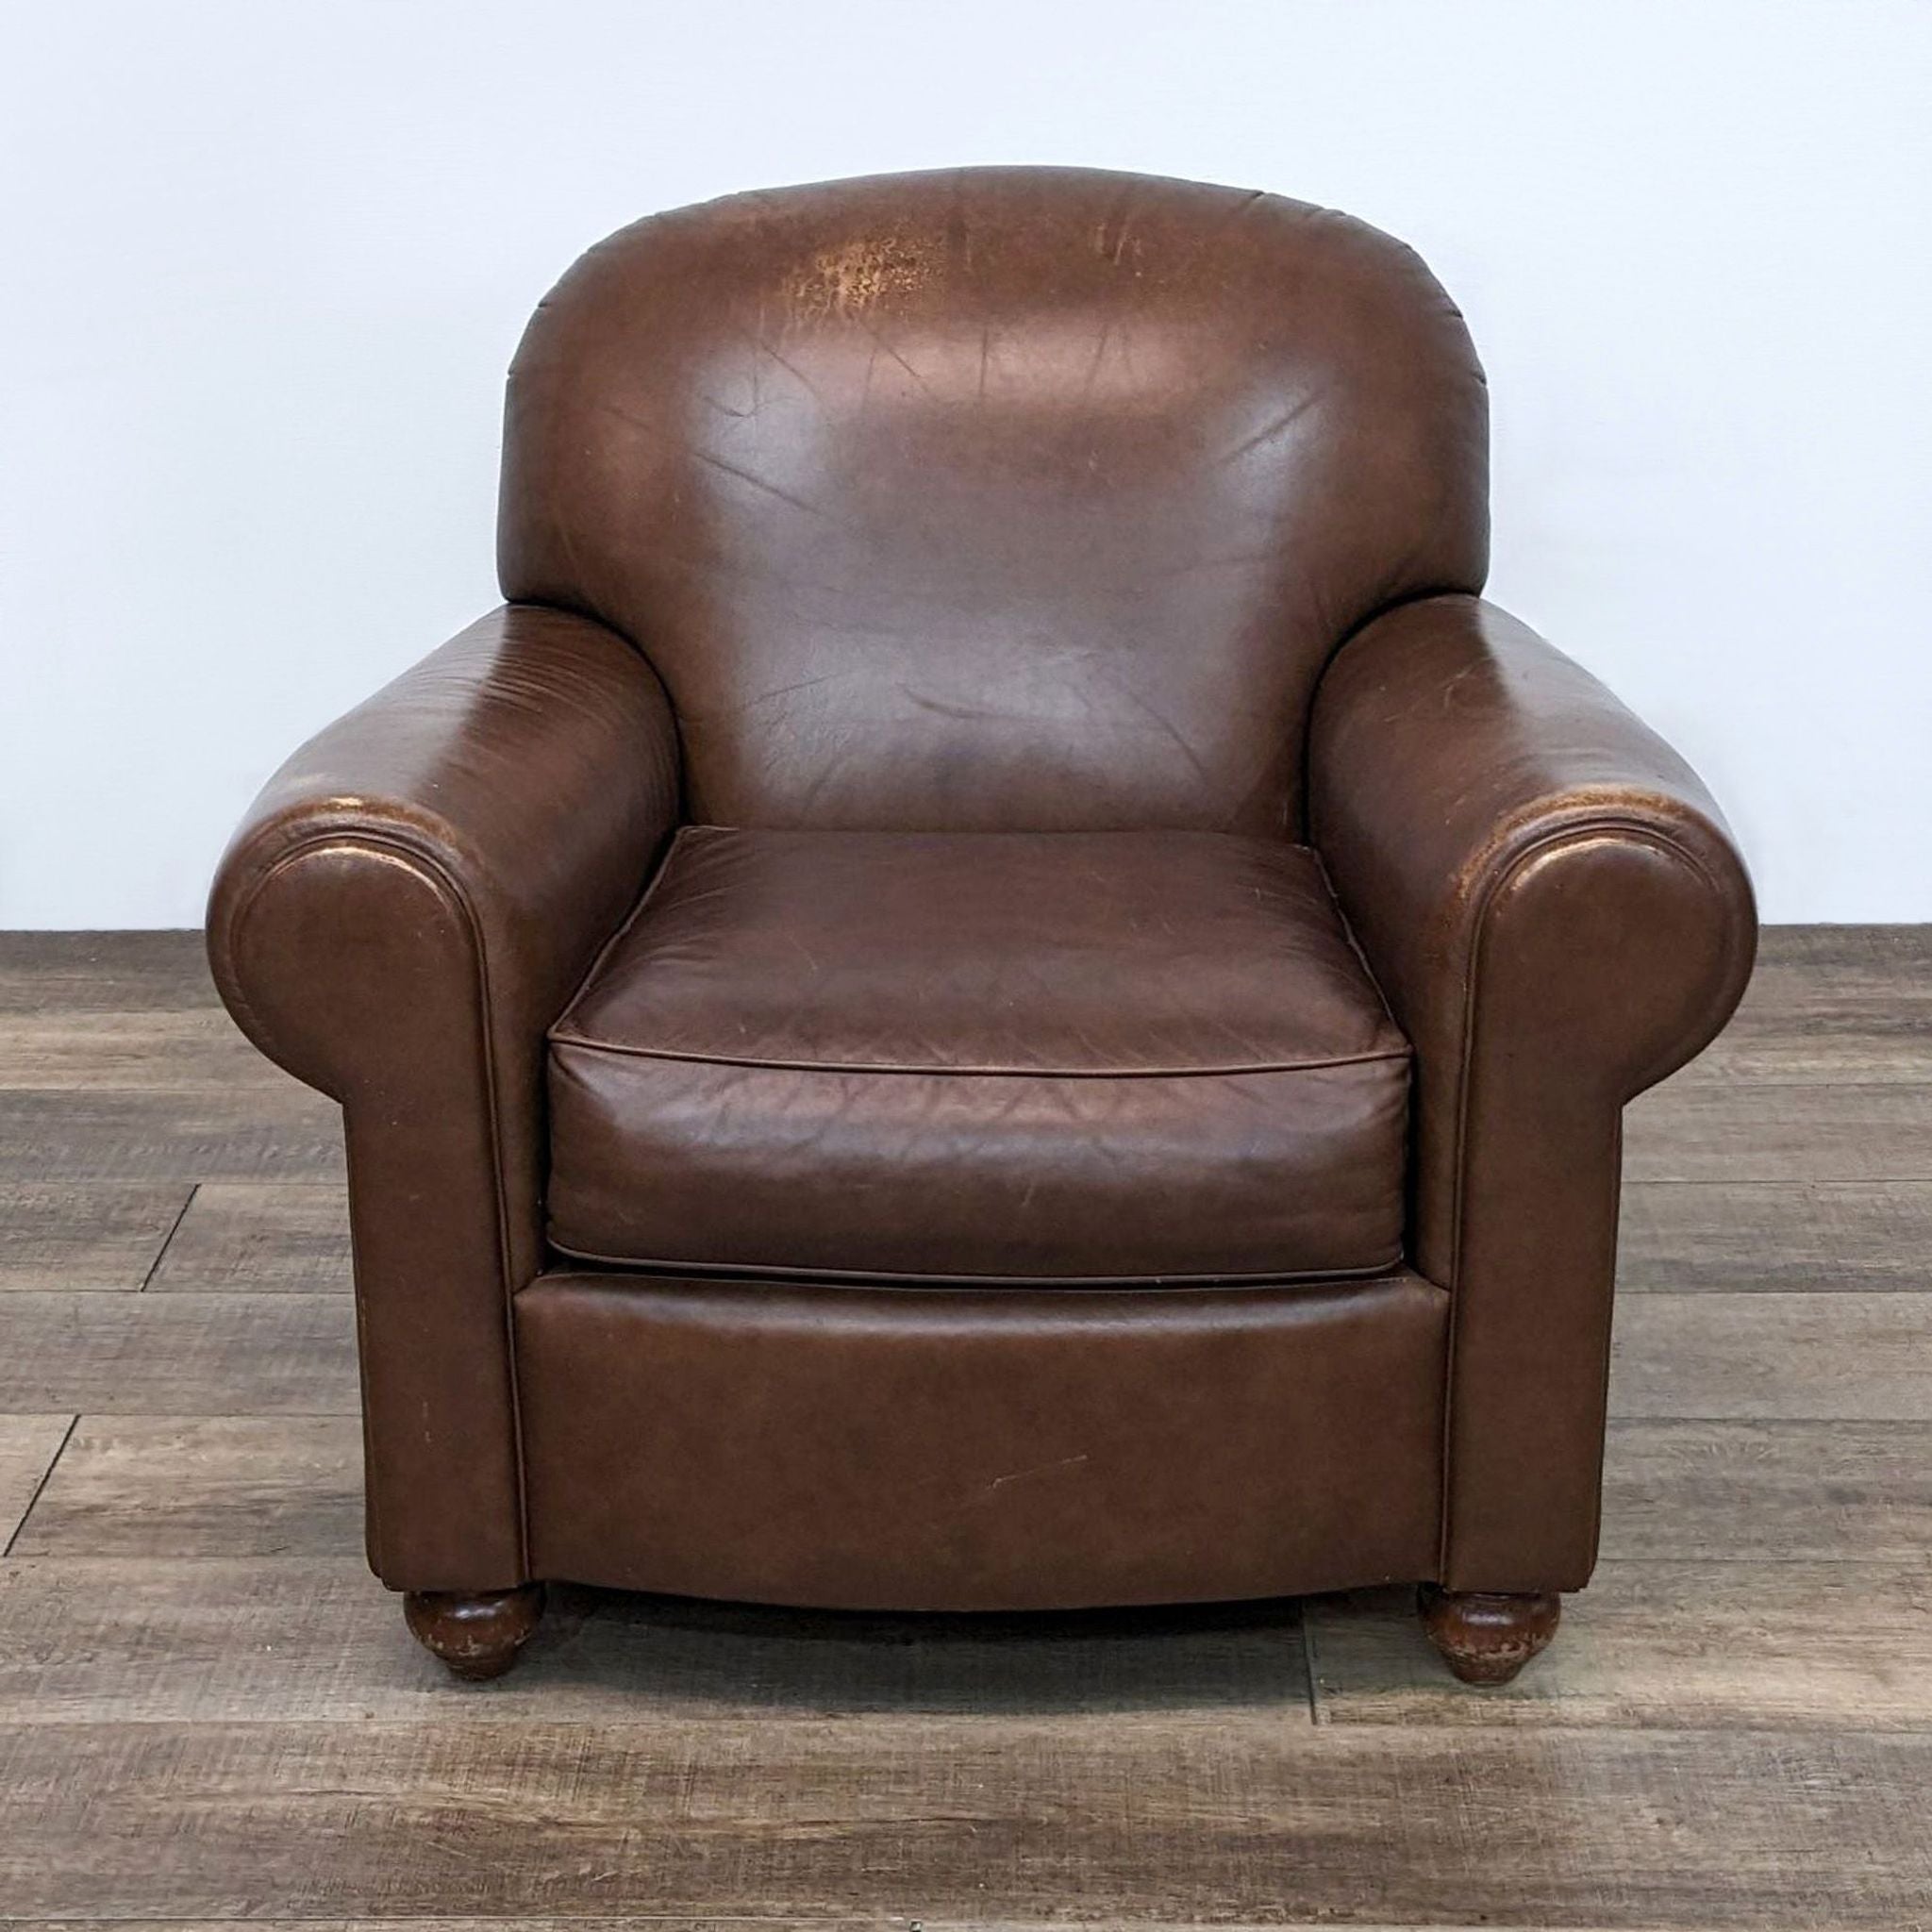 Reperch brand leather club chair with rolled arms, wooden feet, and a comfortable deep seat.